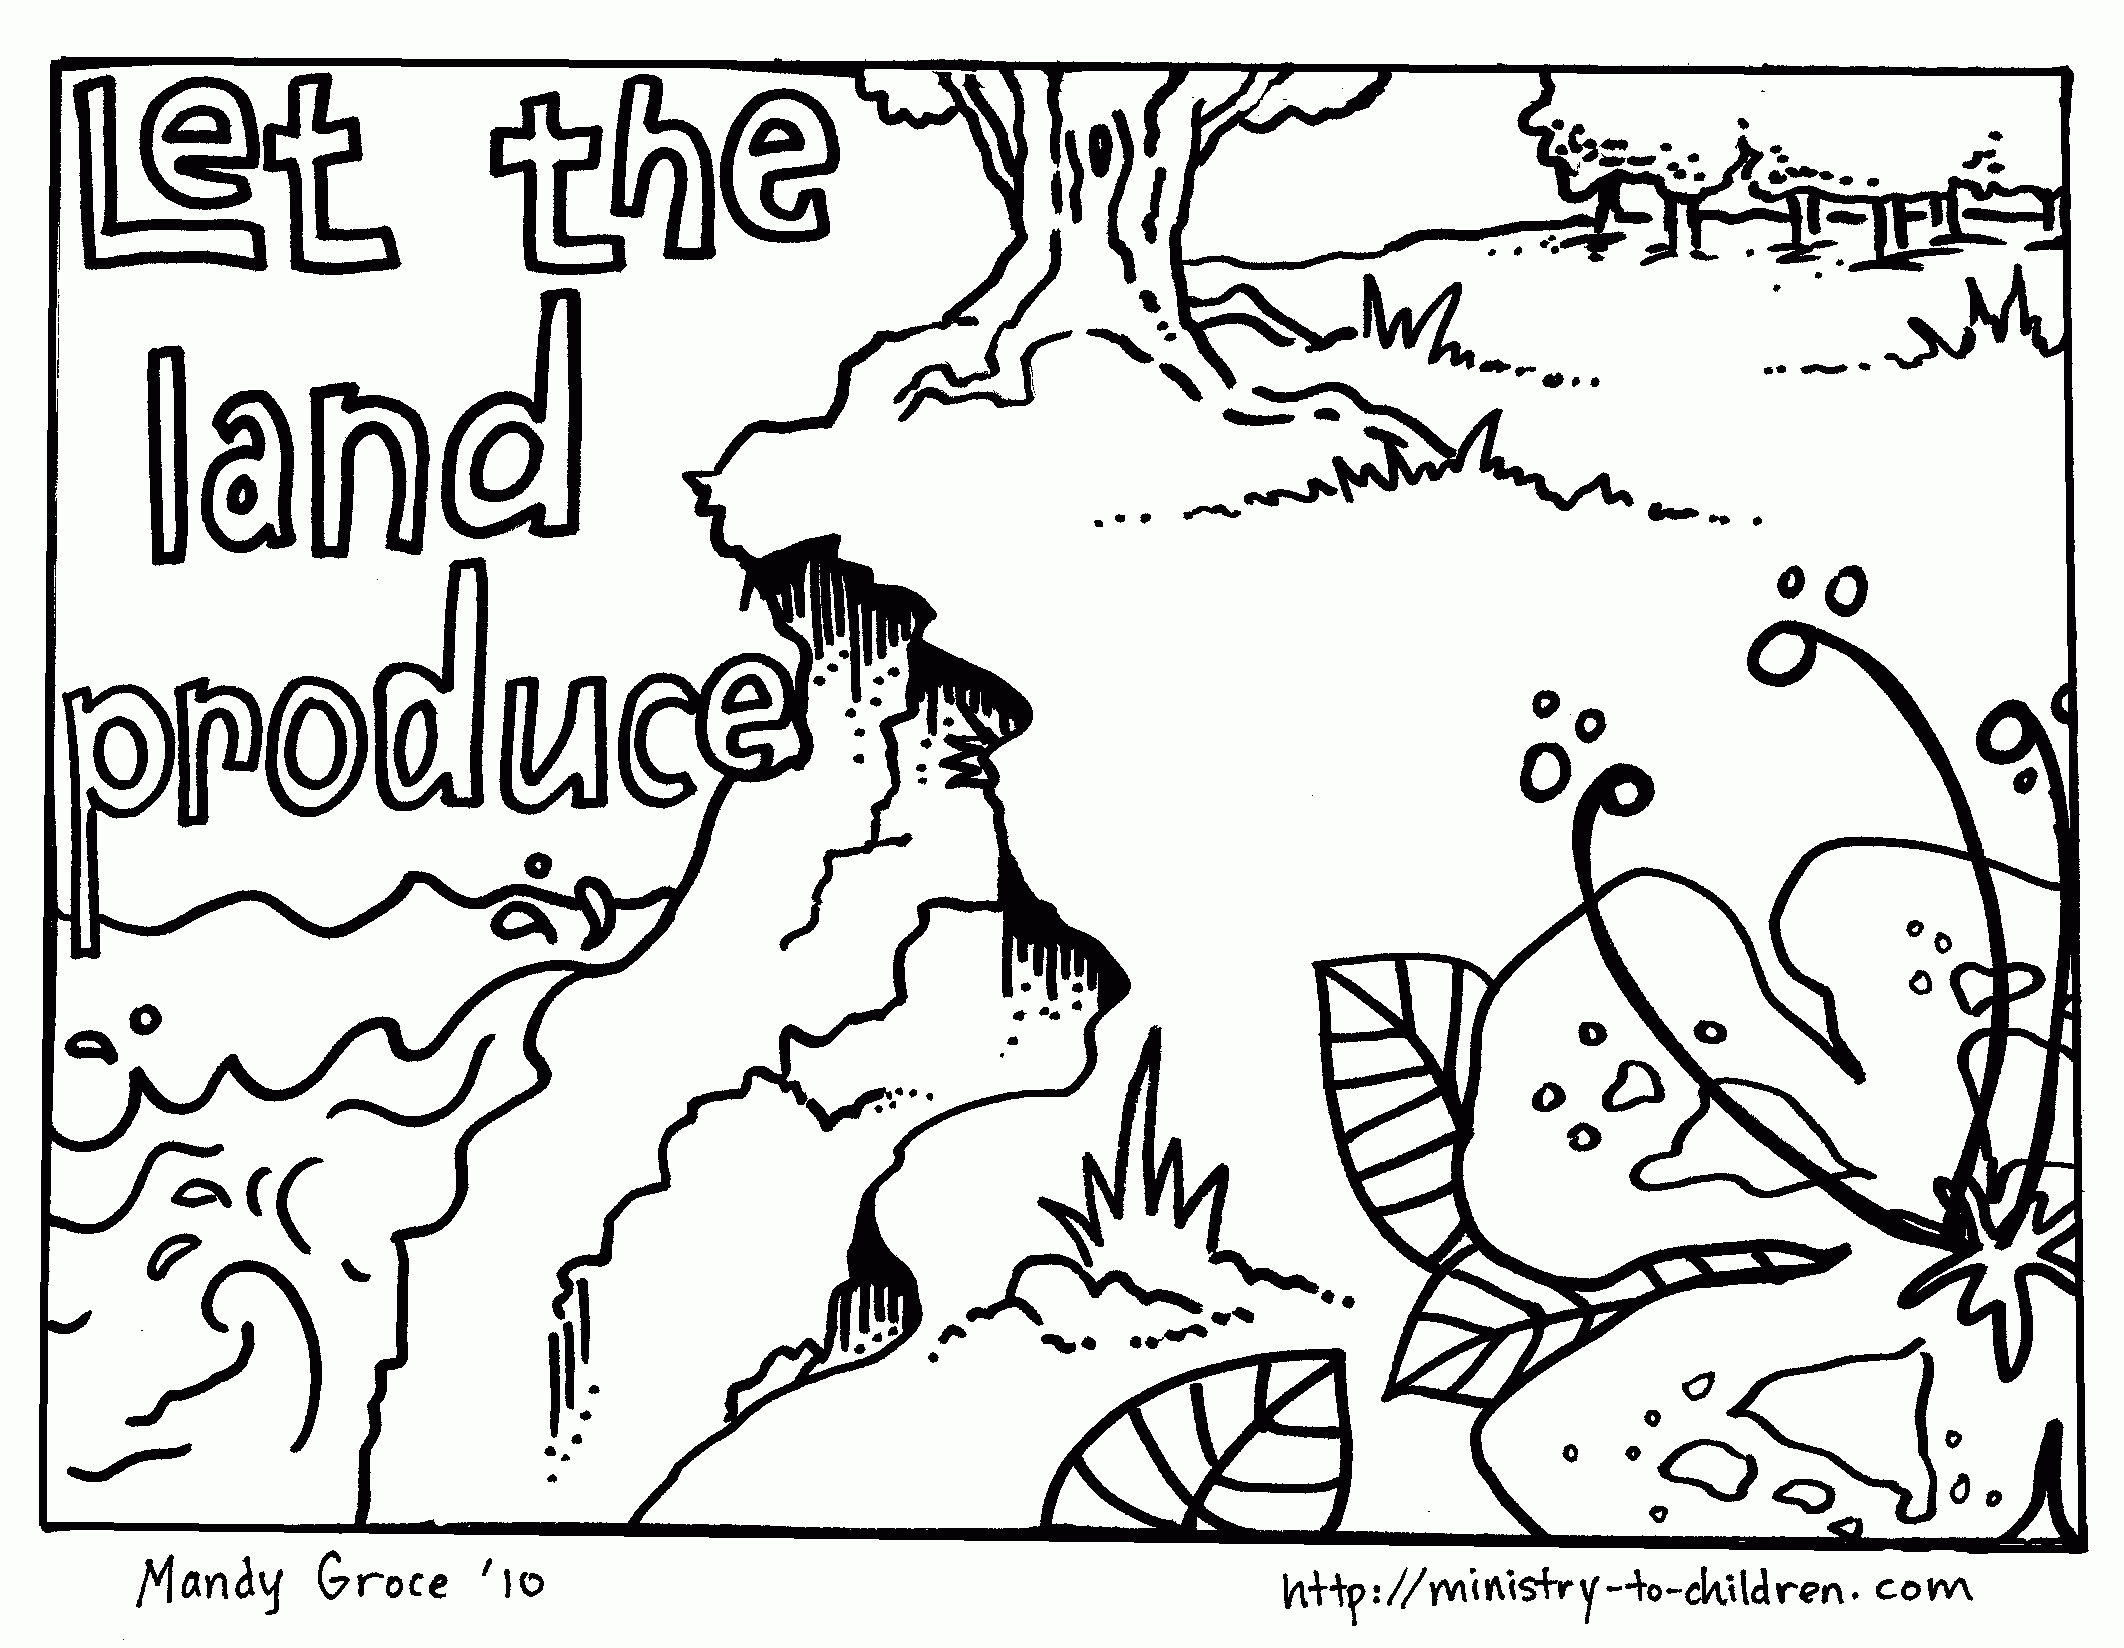 Creation Coloring Pages "Let the Land Produce" Plants Day 3